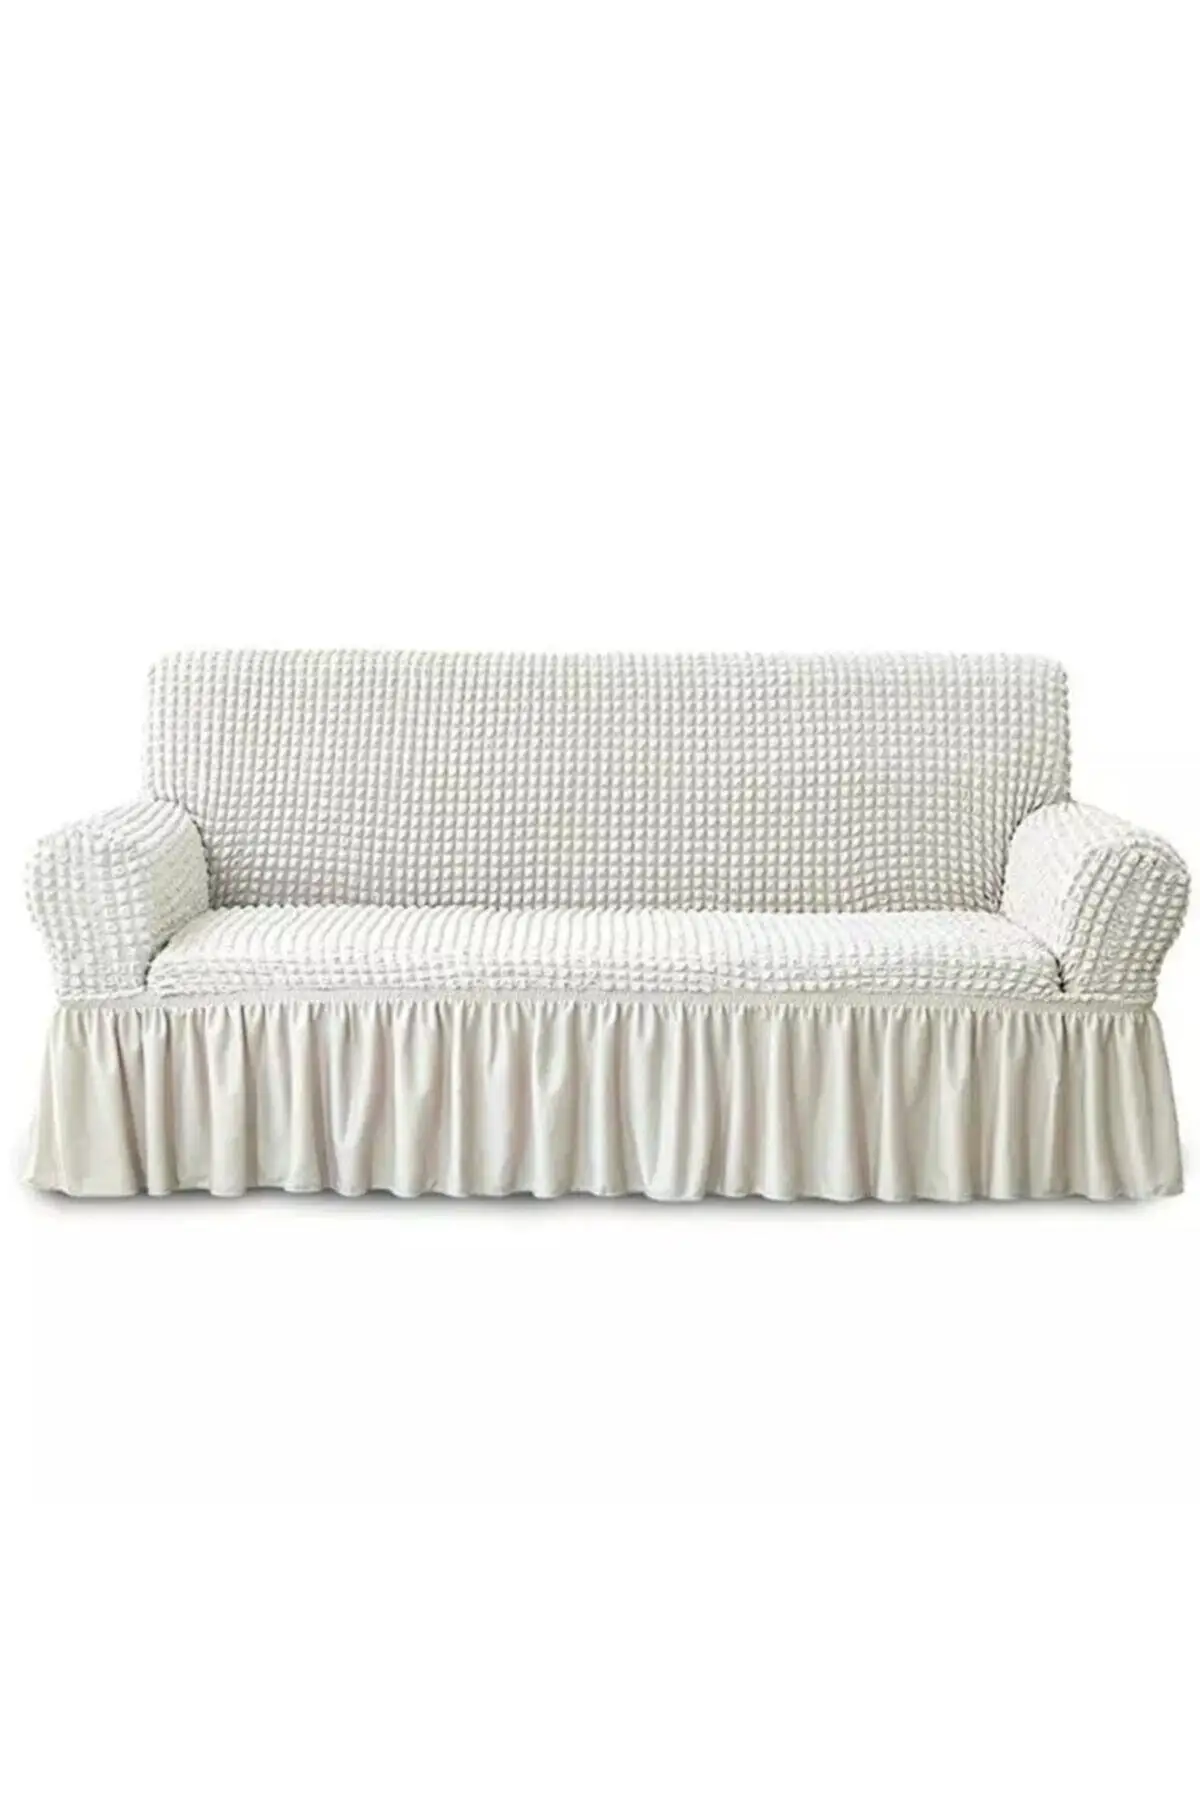 

3 people Bumble Seat, Sofa, Sofa Bed Cover, Seat Cover (3 PERSON) 1 piece Cotton-Polyester 183x230 Ecreu